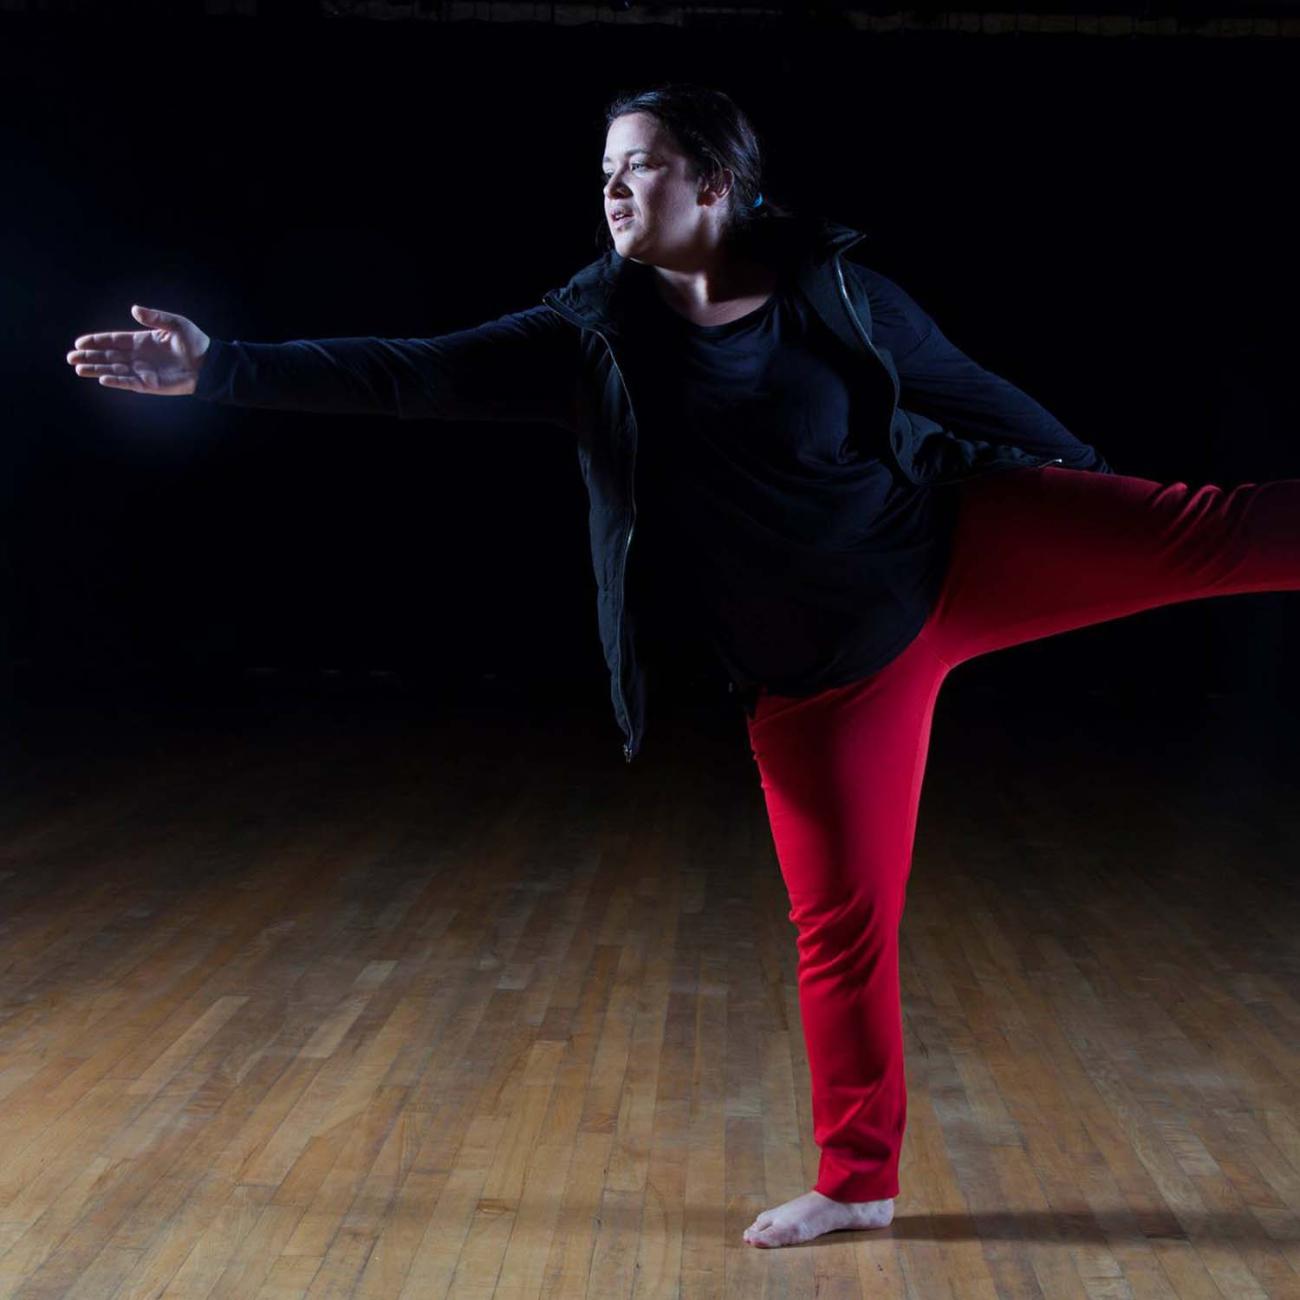 a dancer in a dark studio reaches out with extended hand, counterbalanced by a rearward extending leg